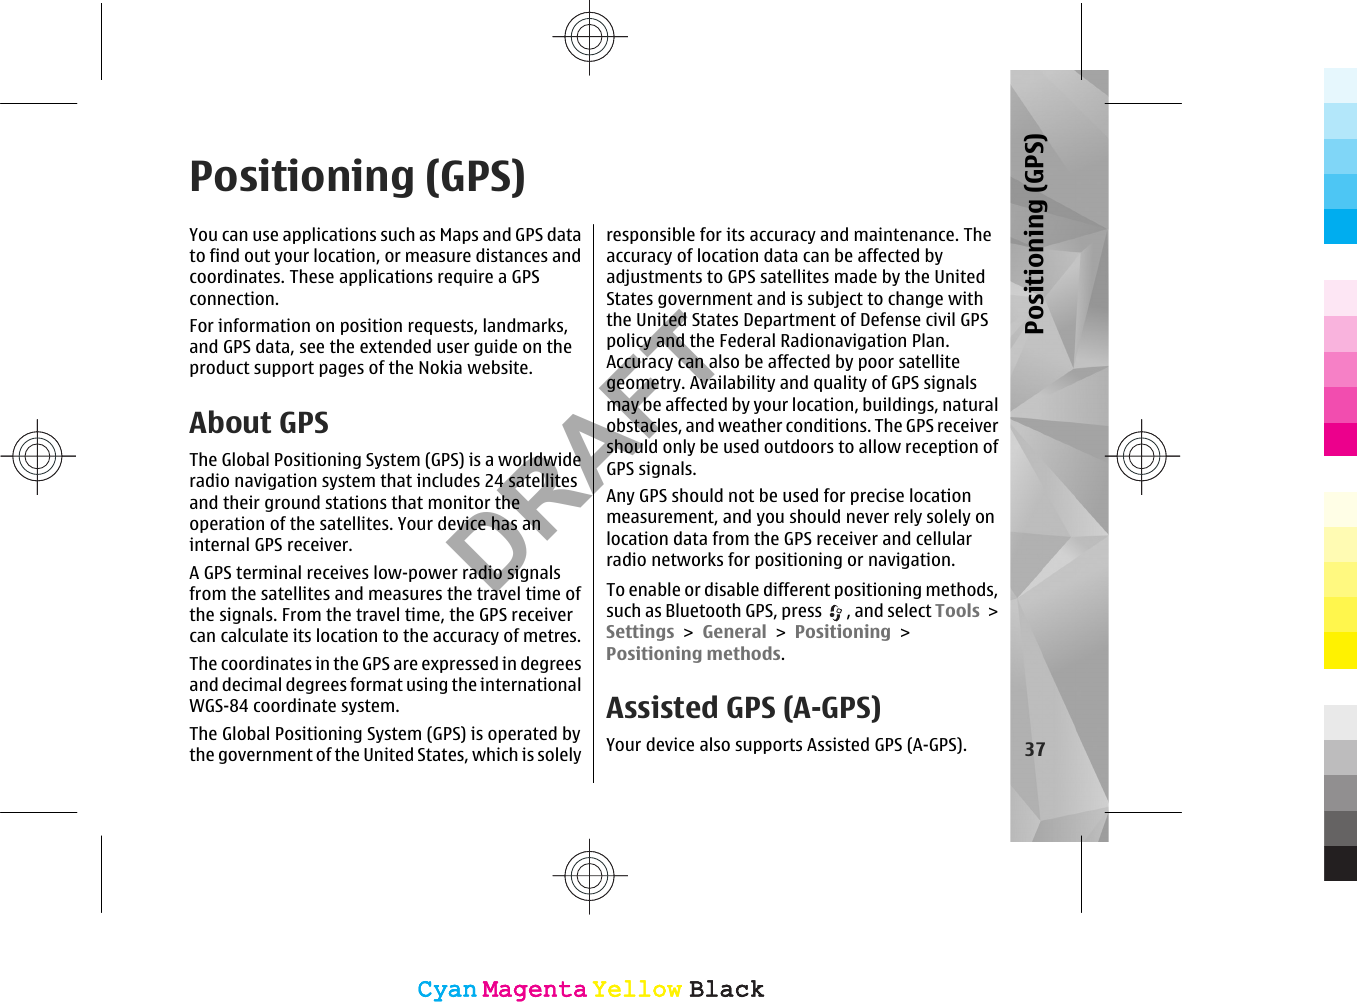 Positioning (GPS)You can use applications such as Maps and GPS datato find out your location, or measure distances andcoordinates. These applications require a GPSconnection.For information on position requests, landmarks,and GPS data, see the extended user guide on theproduct support pages of the Nokia website.About GPSThe Global Positioning System (GPS) is a worldwideradio navigation system that includes 24 satellitesand their ground stations that monitor theoperation of the satellites. Your device has aninternal GPS receiver.A GPS terminal receives low-power radio signalsfrom the satellites and measures the travel time ofthe signals. From the travel time, the GPS receivercan calculate its location to the accuracy of metres.The coordinates in the GPS are expressed in degreesand decimal degrees format using the internationalWGS-84 coordinate system.The Global Positioning System (GPS) is operated bythe government of the United States, which is solelyresponsible for its accuracy and maintenance. Theaccuracy of location data can be affected byadjustments to GPS satellites made by the UnitedStates government and is subject to change withthe United States Department of Defense civil GPSpolicy and the Federal Radionavigation Plan.Accuracy can also be affected by poor satellitegeometry. Availability and quality of GPS signalsmay be affected by your location, buildings, naturalobstacles, and weather conditions. The GPS receivershould only be used outdoors to allow reception ofGPS signals.Any GPS should not be used for precise locationmeasurement, and you should never rely solely onlocation data from the GPS receiver and cellularradio networks for positioning or navigation.To enable or disable different positioning methods,such as Bluetooth GPS, press  , and select Tools &gt;Settings &gt; General &gt; Positioning &gt;Positioning methods.Assisted GPS (A-GPS)Your device also supports Assisted GPS (A-GPS). 37Positioning (GPS)CyanCyanMagentaMagentaYellowYellowBlackBlackCyanCyanMagentaMagentaYellowYellowBlackBlackDRAFT